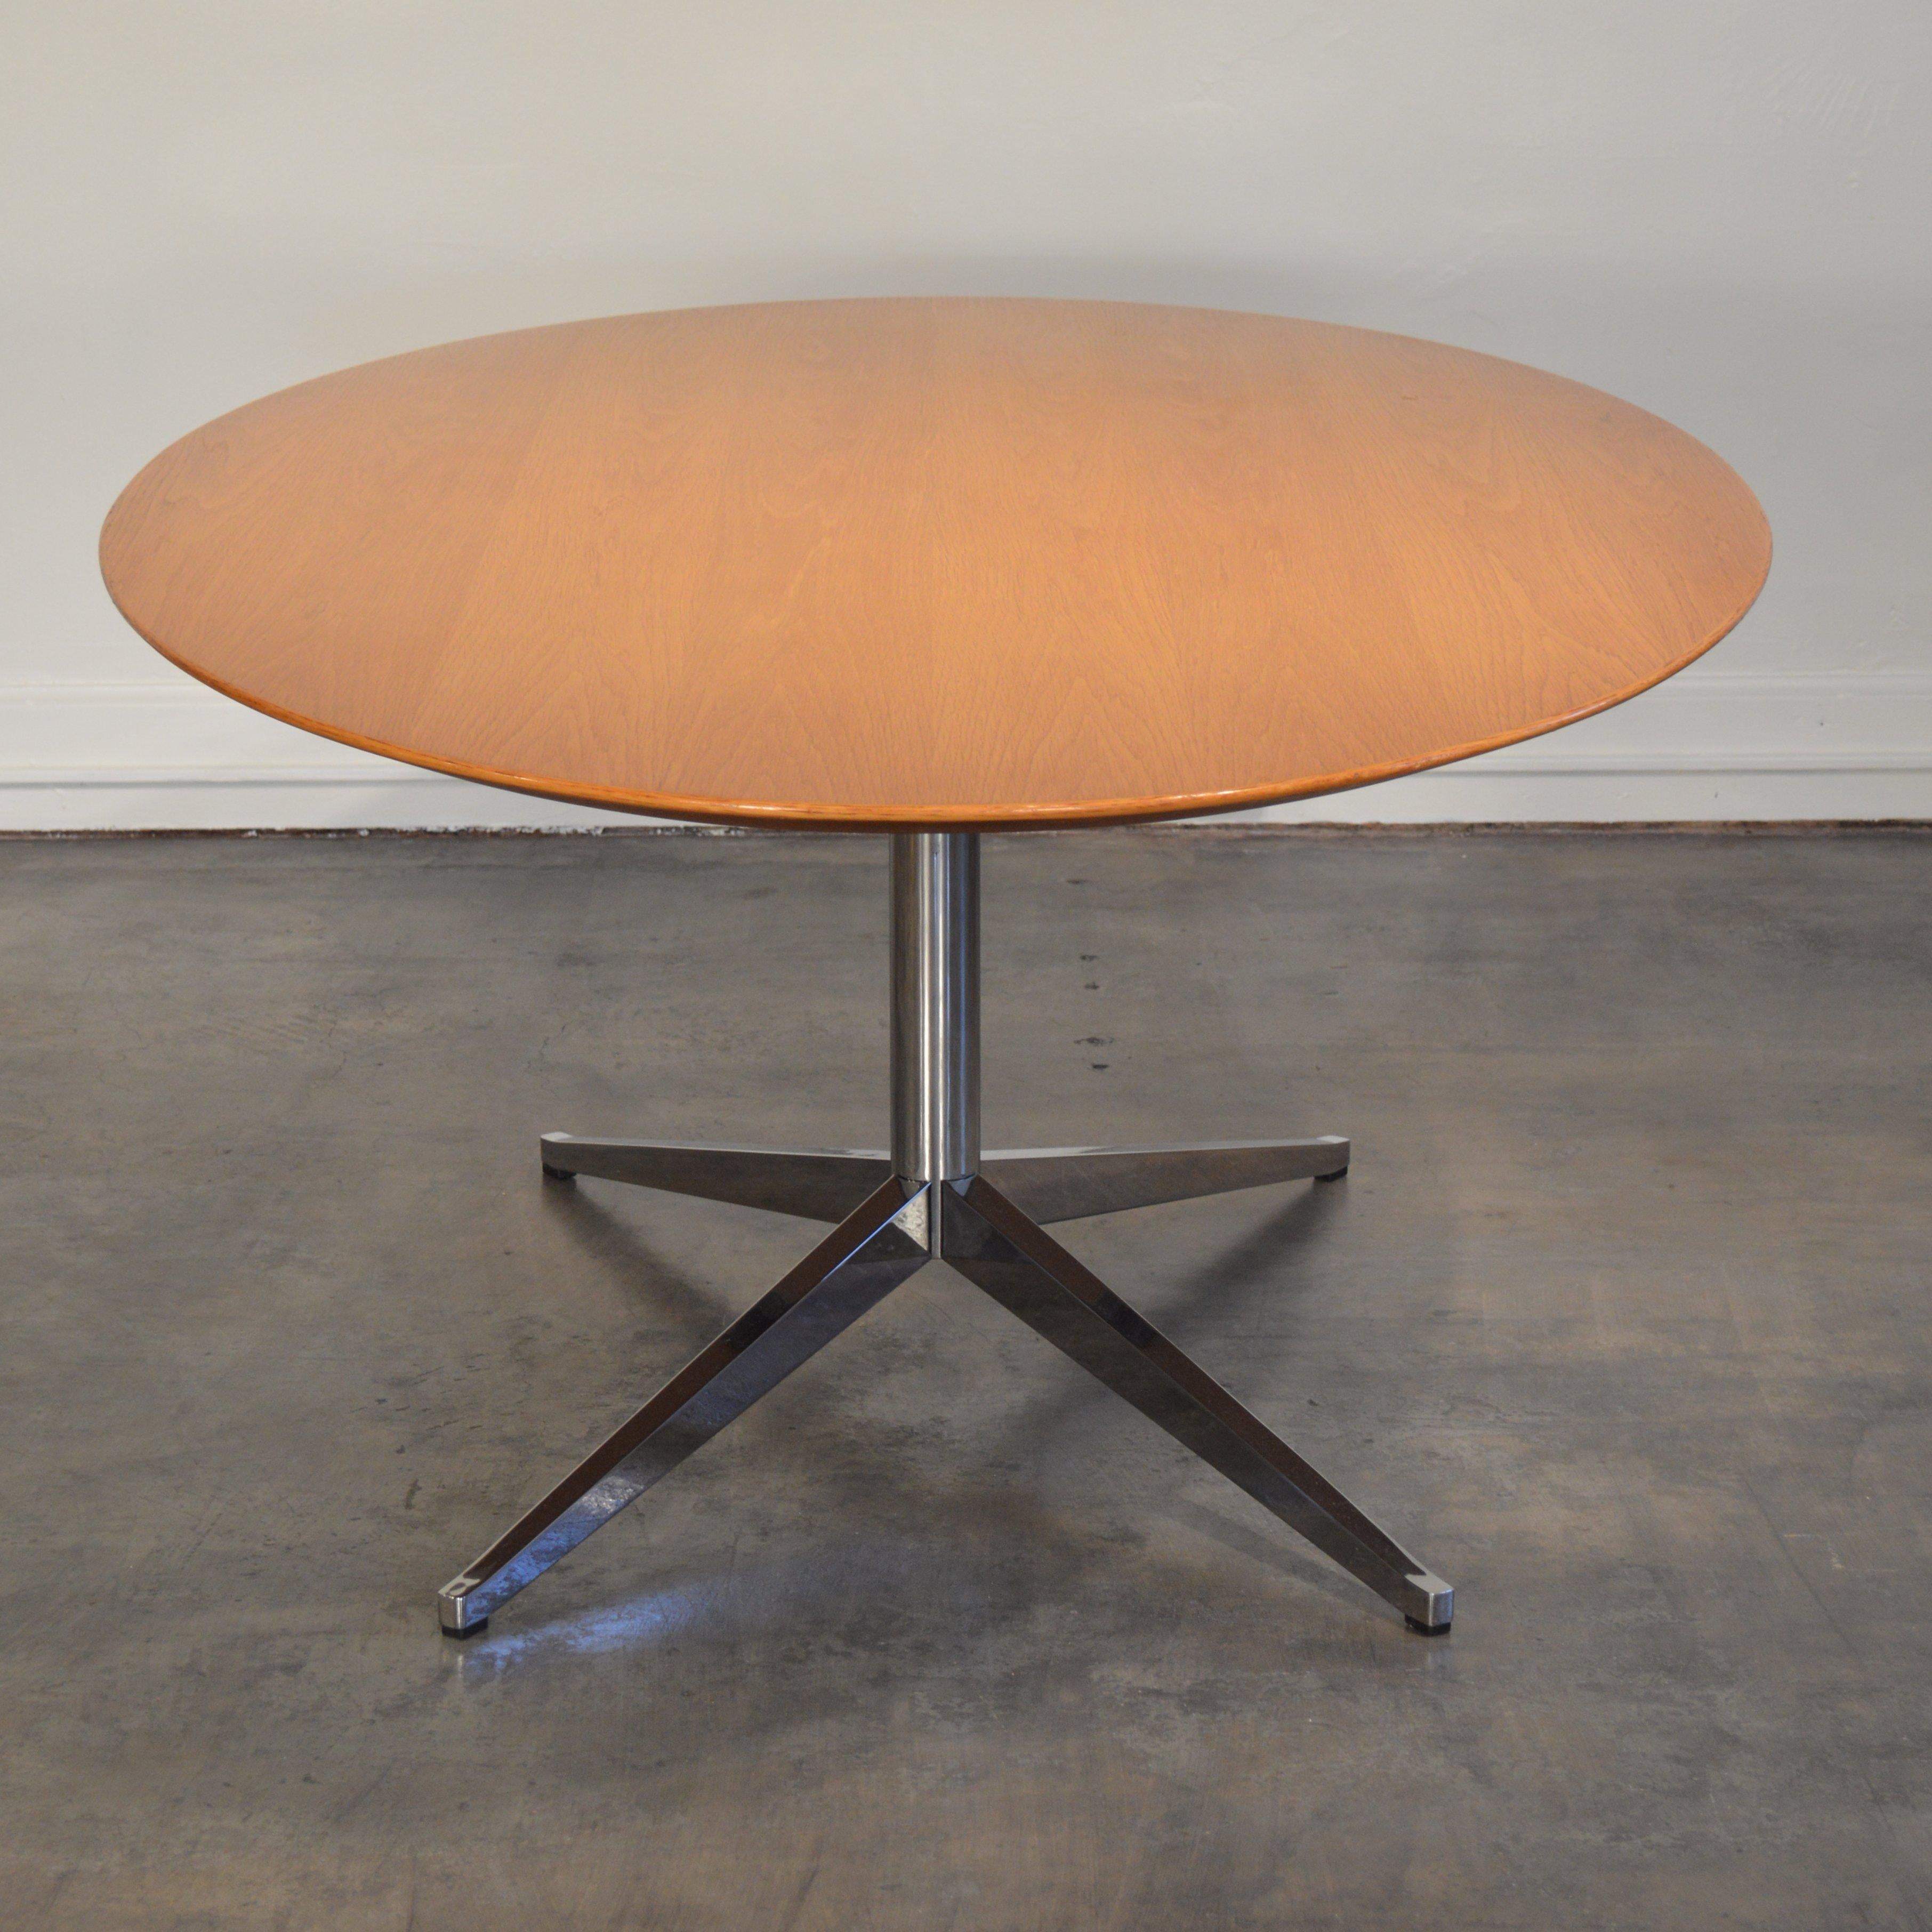 Florence Knoll Oval Table/Desk with Oak Top In Good Condition For Sale In Portland, ME